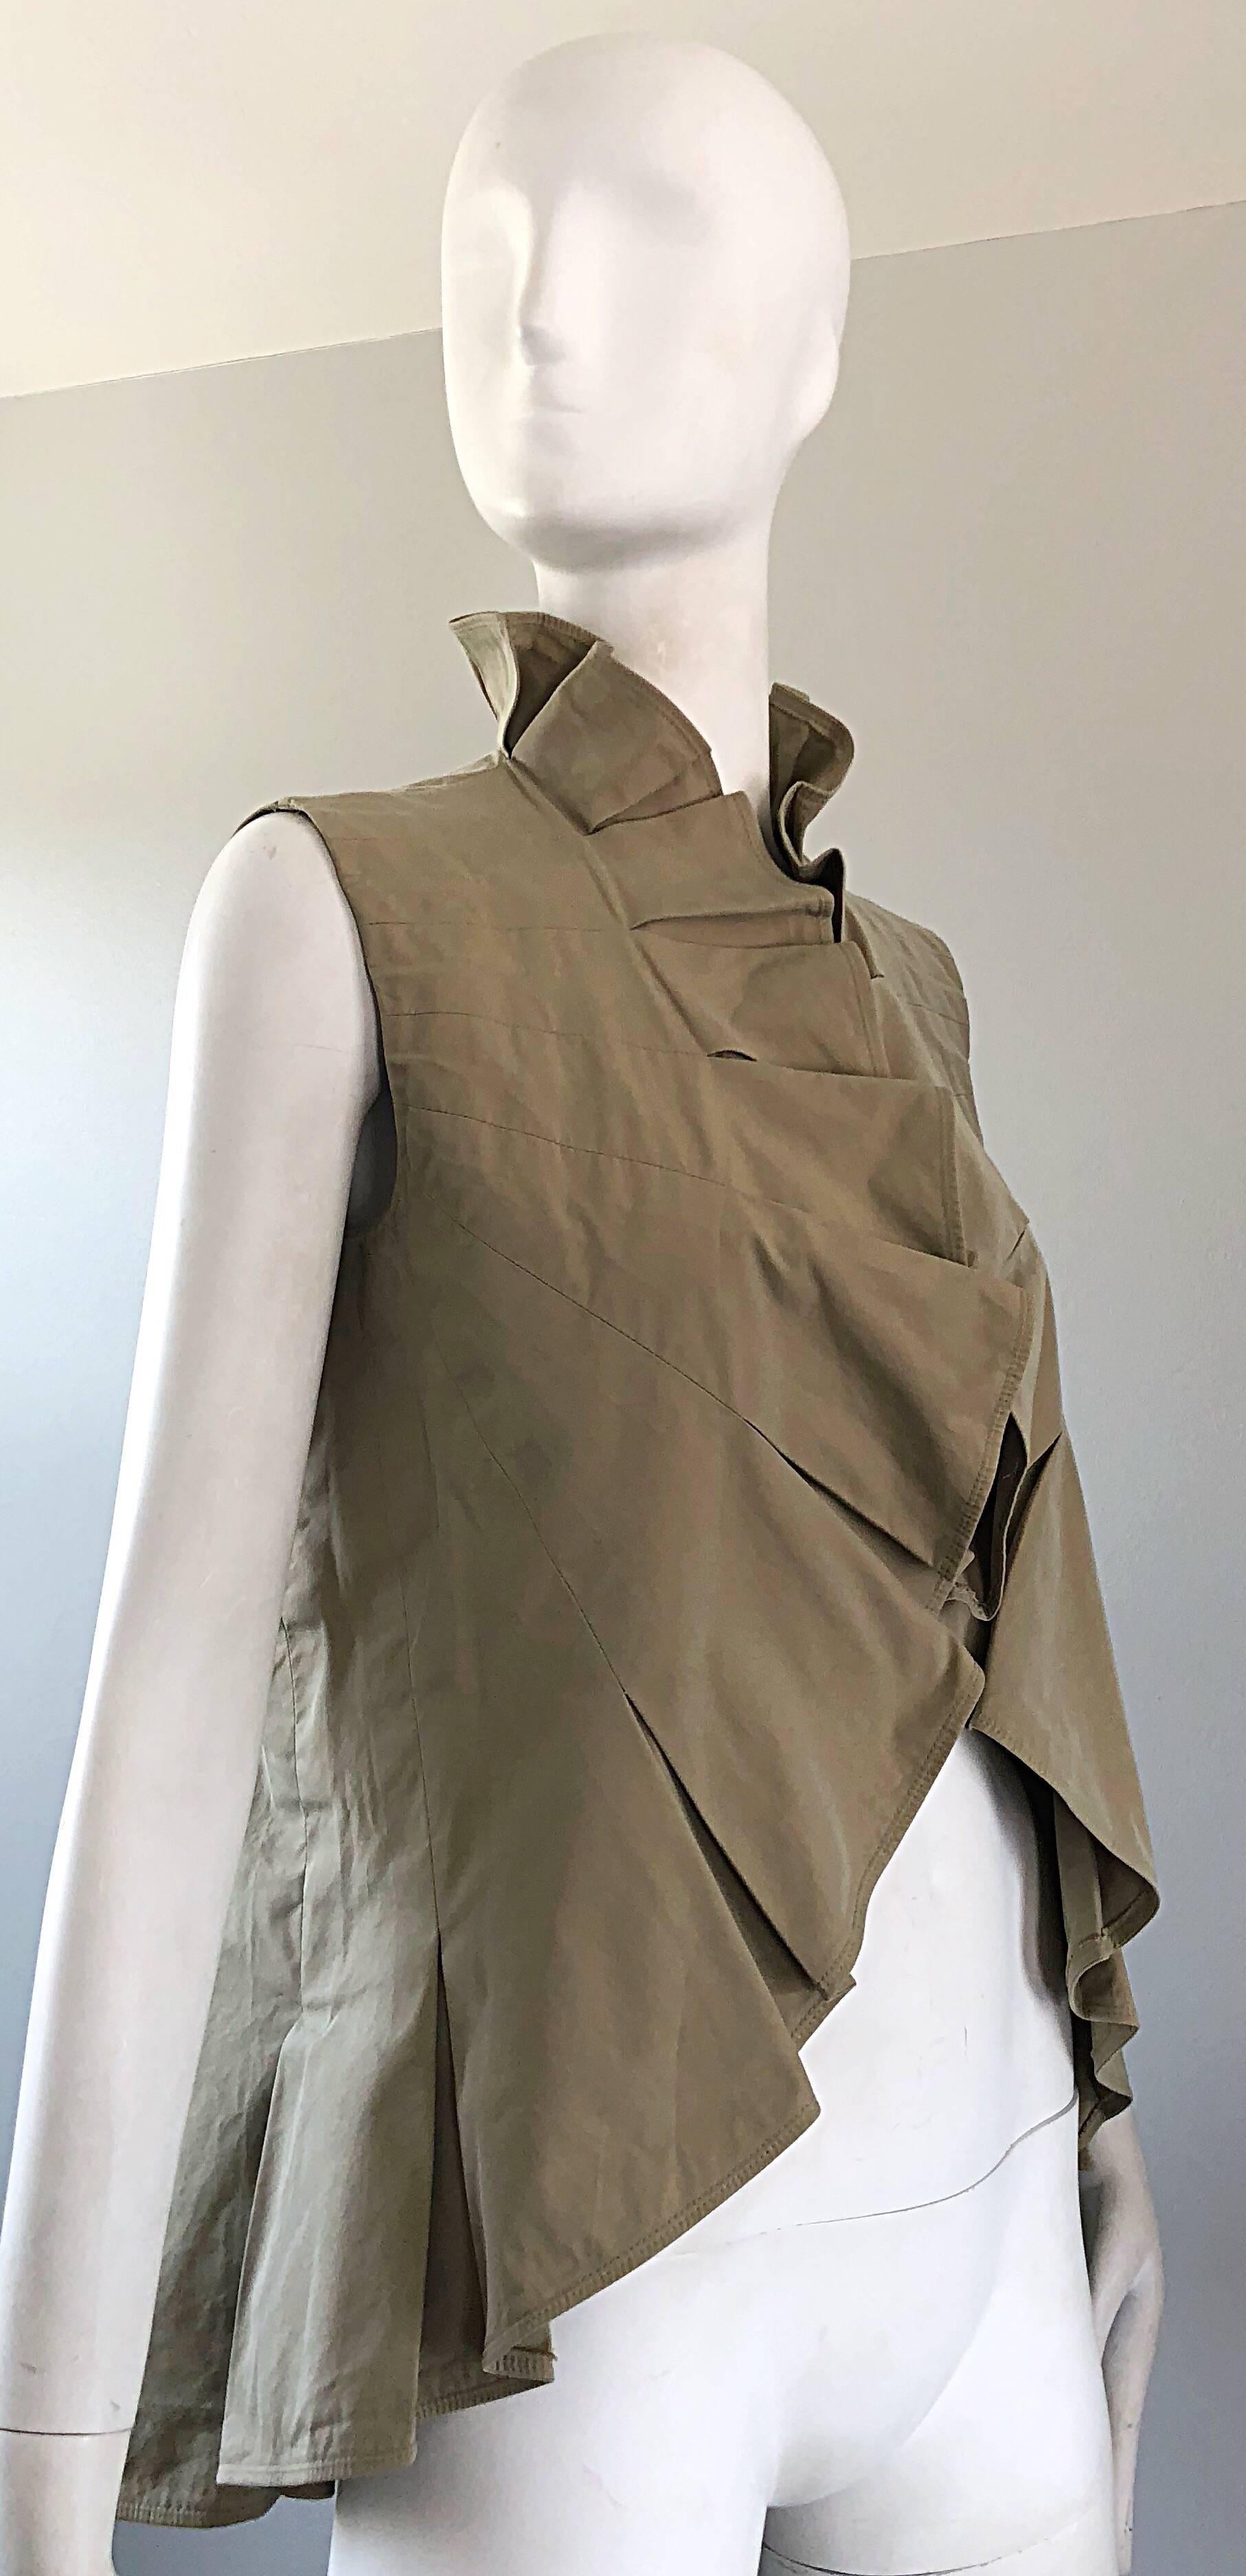 Yves Saint Laurent Size 40 / US 8 Khaki Tan YSL Cotton Safari Ruffle Vest Top In Excellent Condition For Sale In San Diego, CA